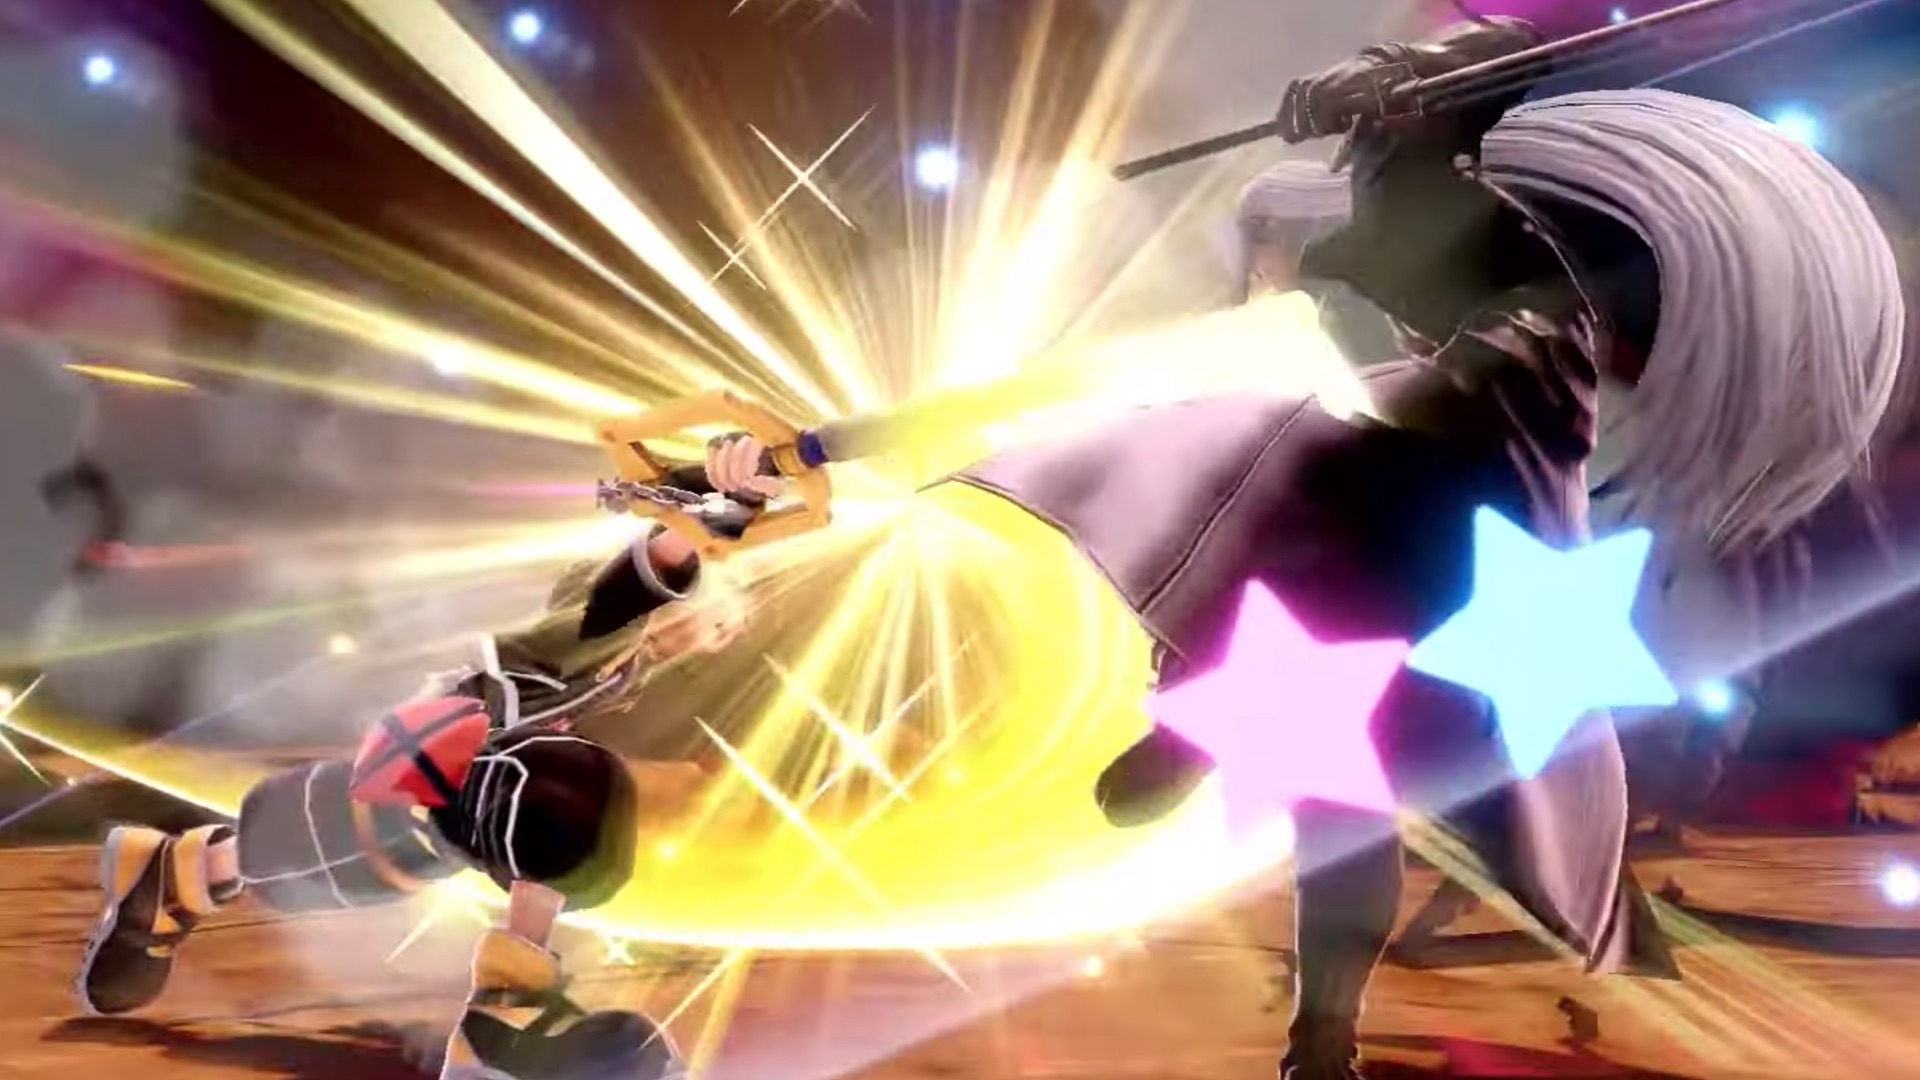 This is what the “anime sword fighter” is : r/SmashBrosUltimate